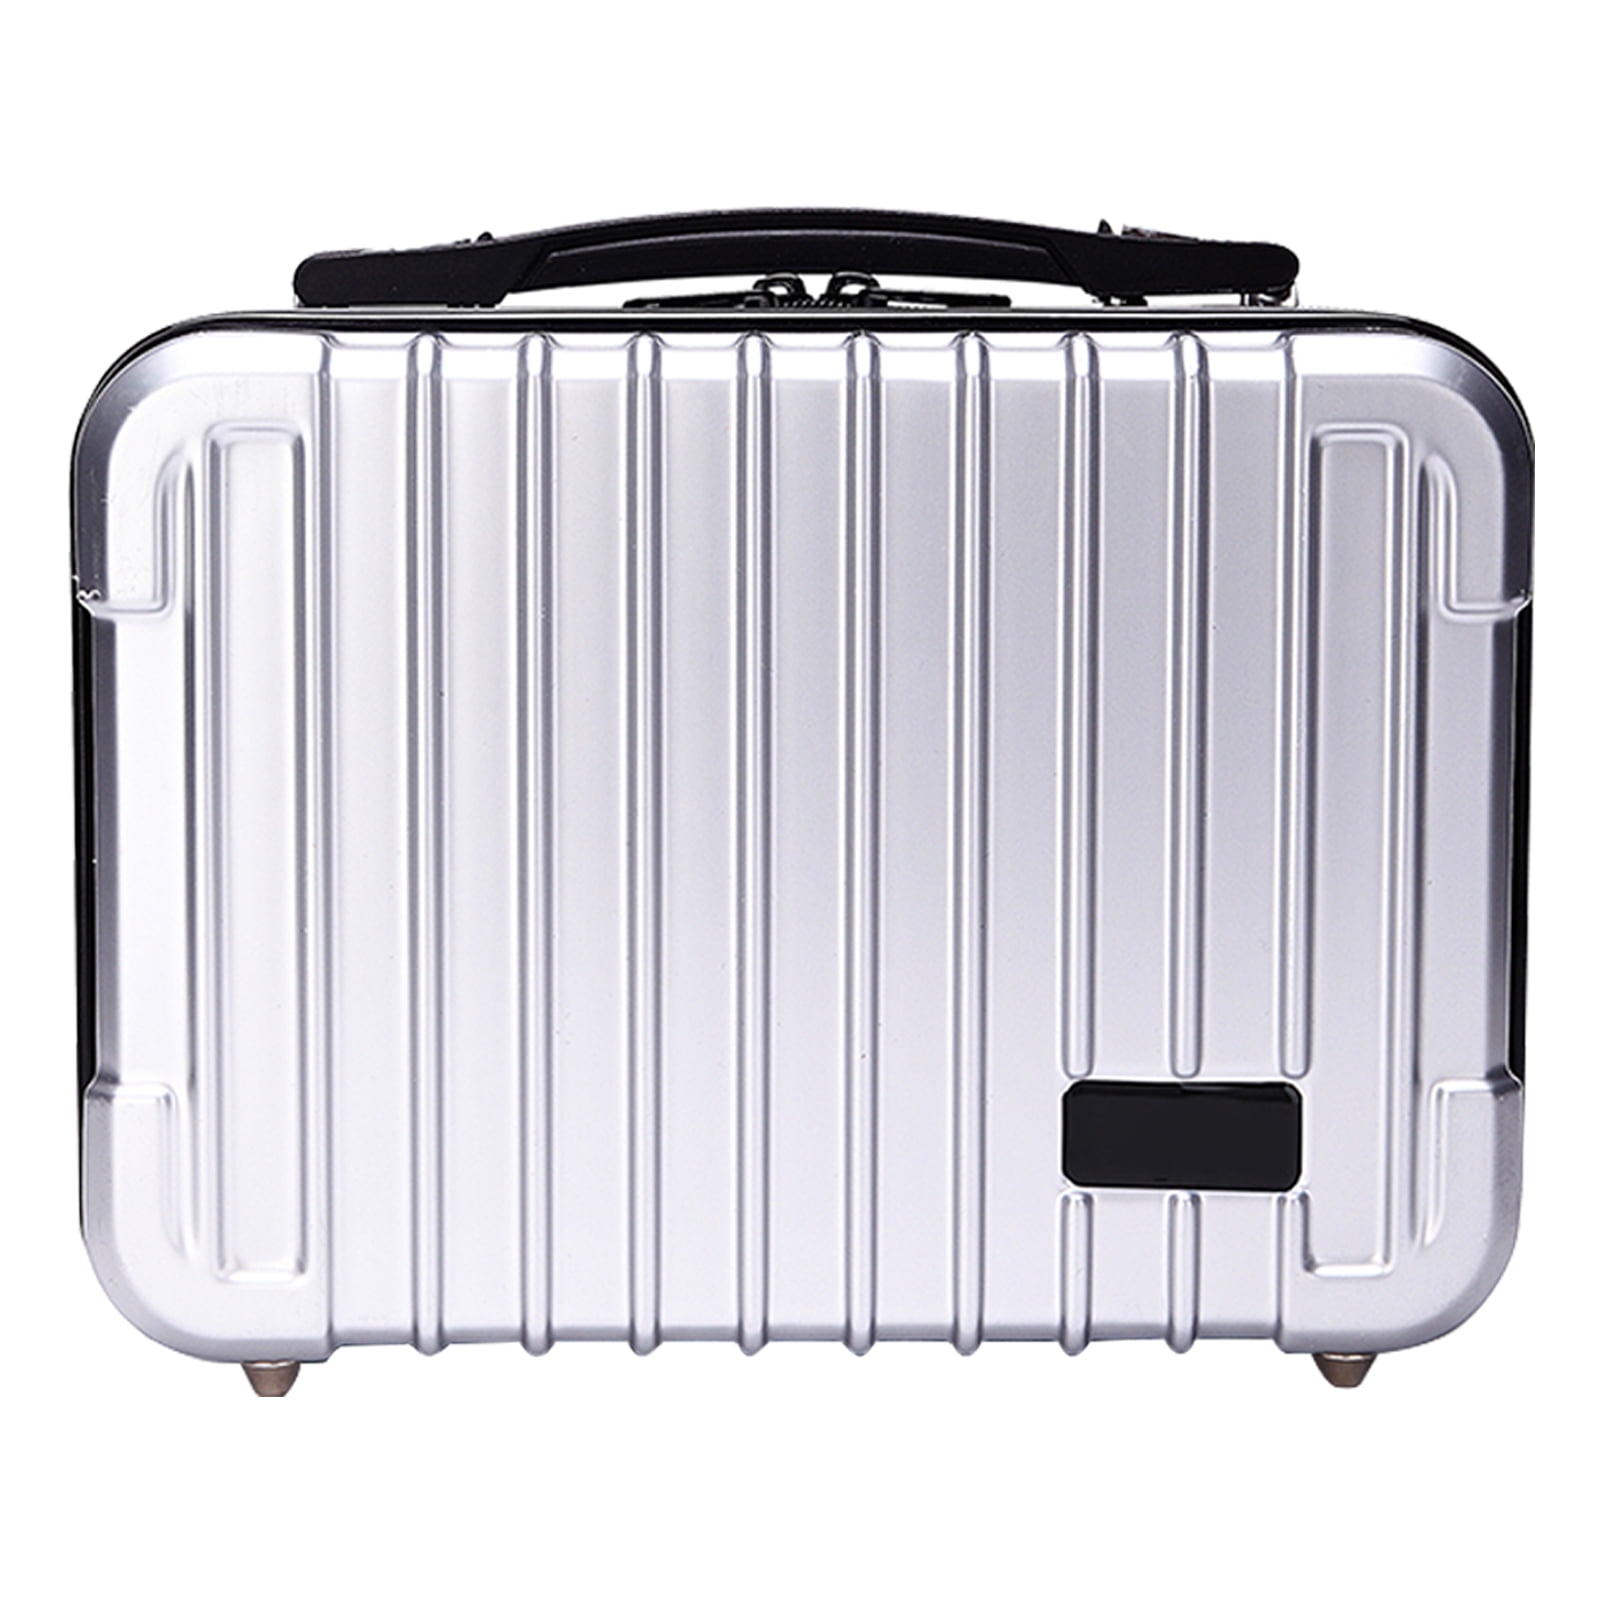 Details about   Travel Carrying Storage Bag Cover Hard Case Box for DJI MINI 2 Drone Accessories 